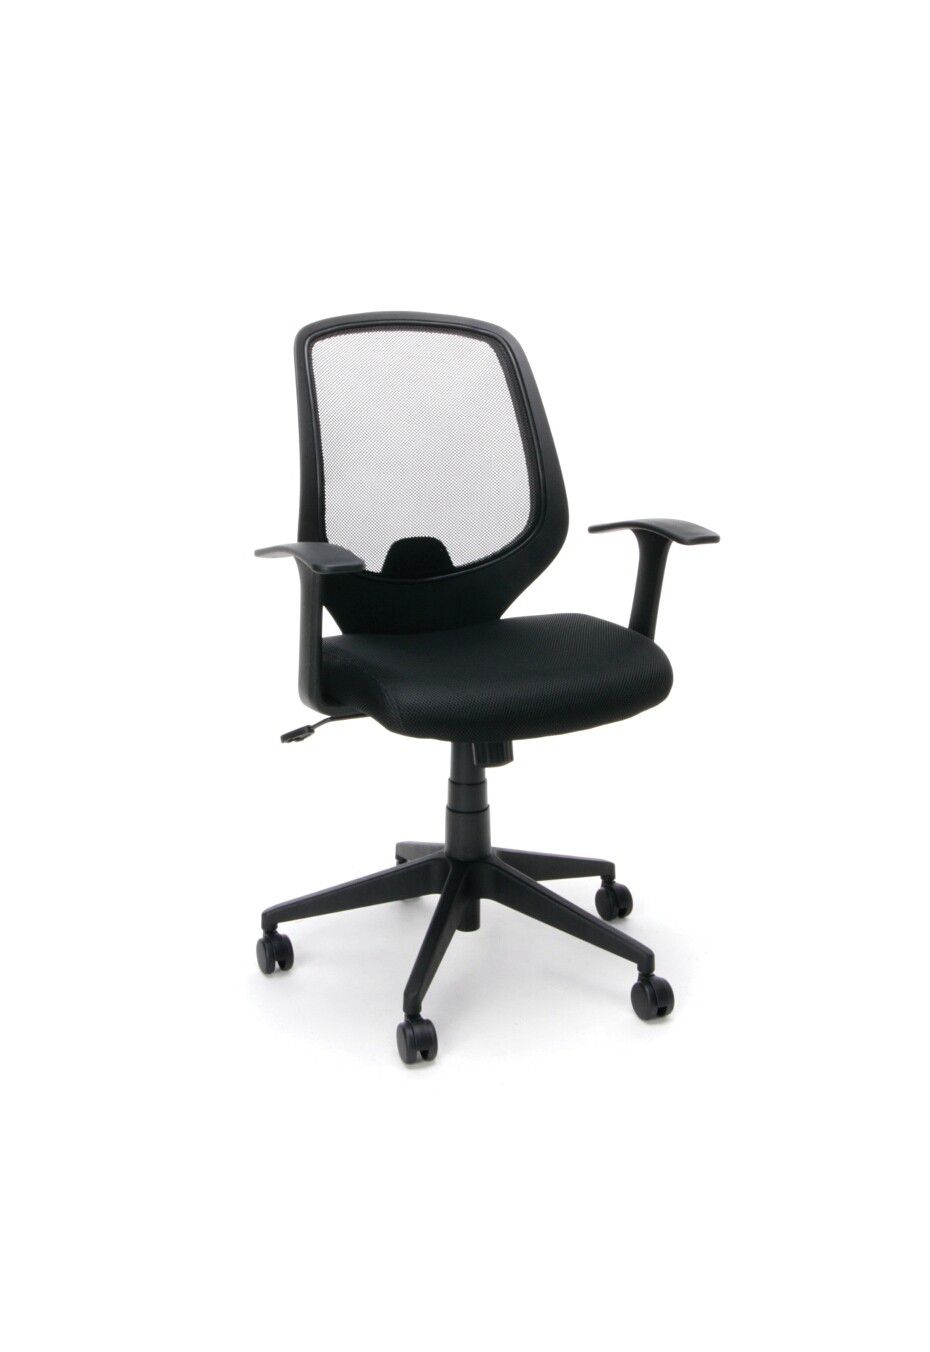 Mesh Swivel Chairs with Adjustable Height and Arms